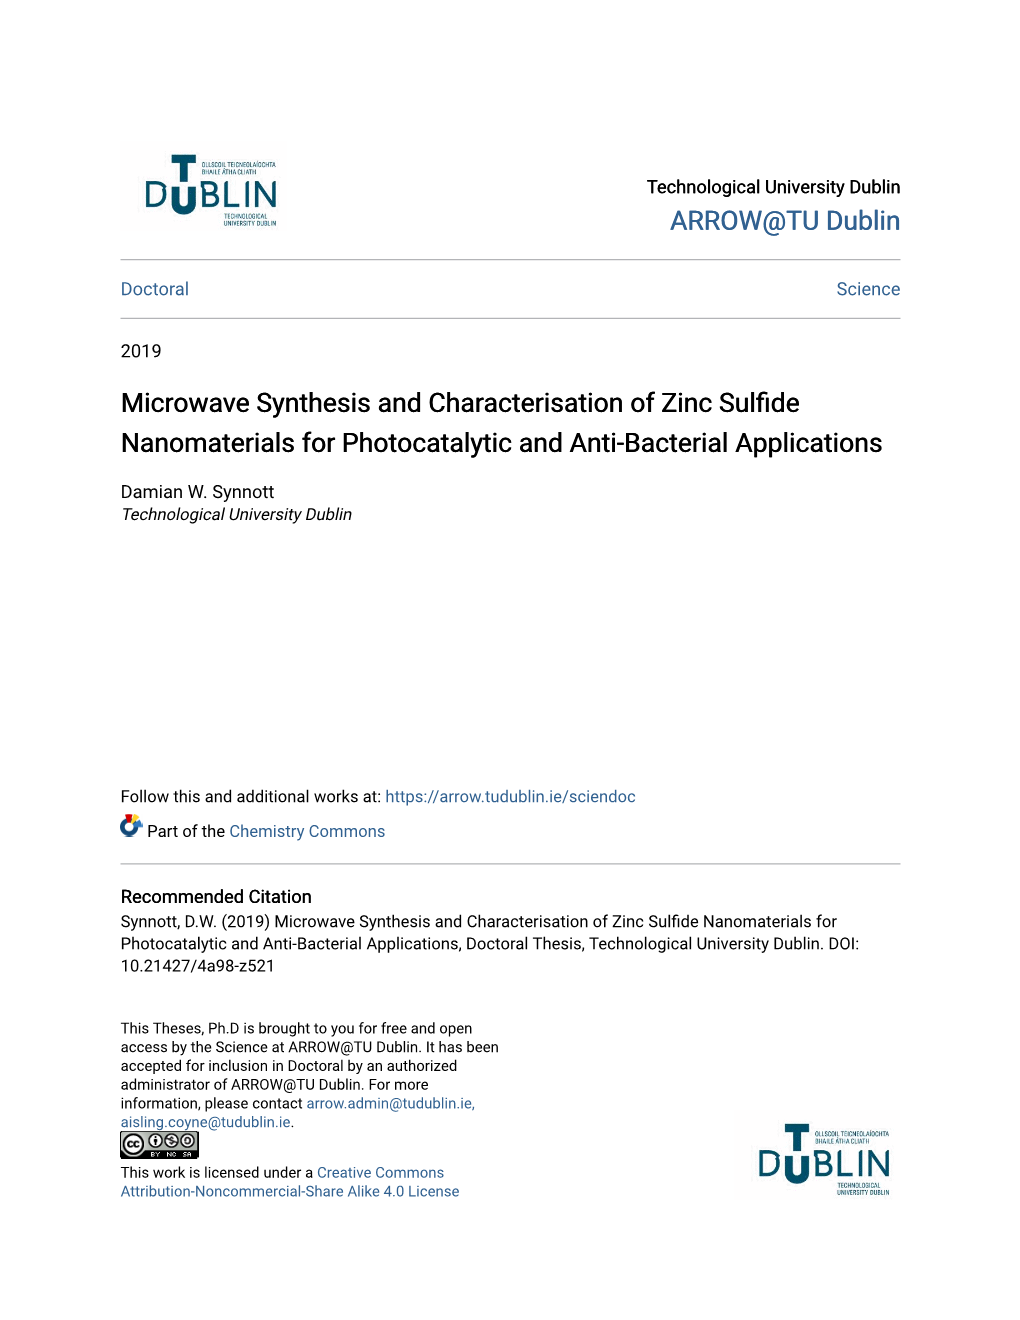 Microwave Synthesis and Characterisation of Zinc Sulfide Nanomaterials for Photocatalytic and Anti-Bacterial Applications